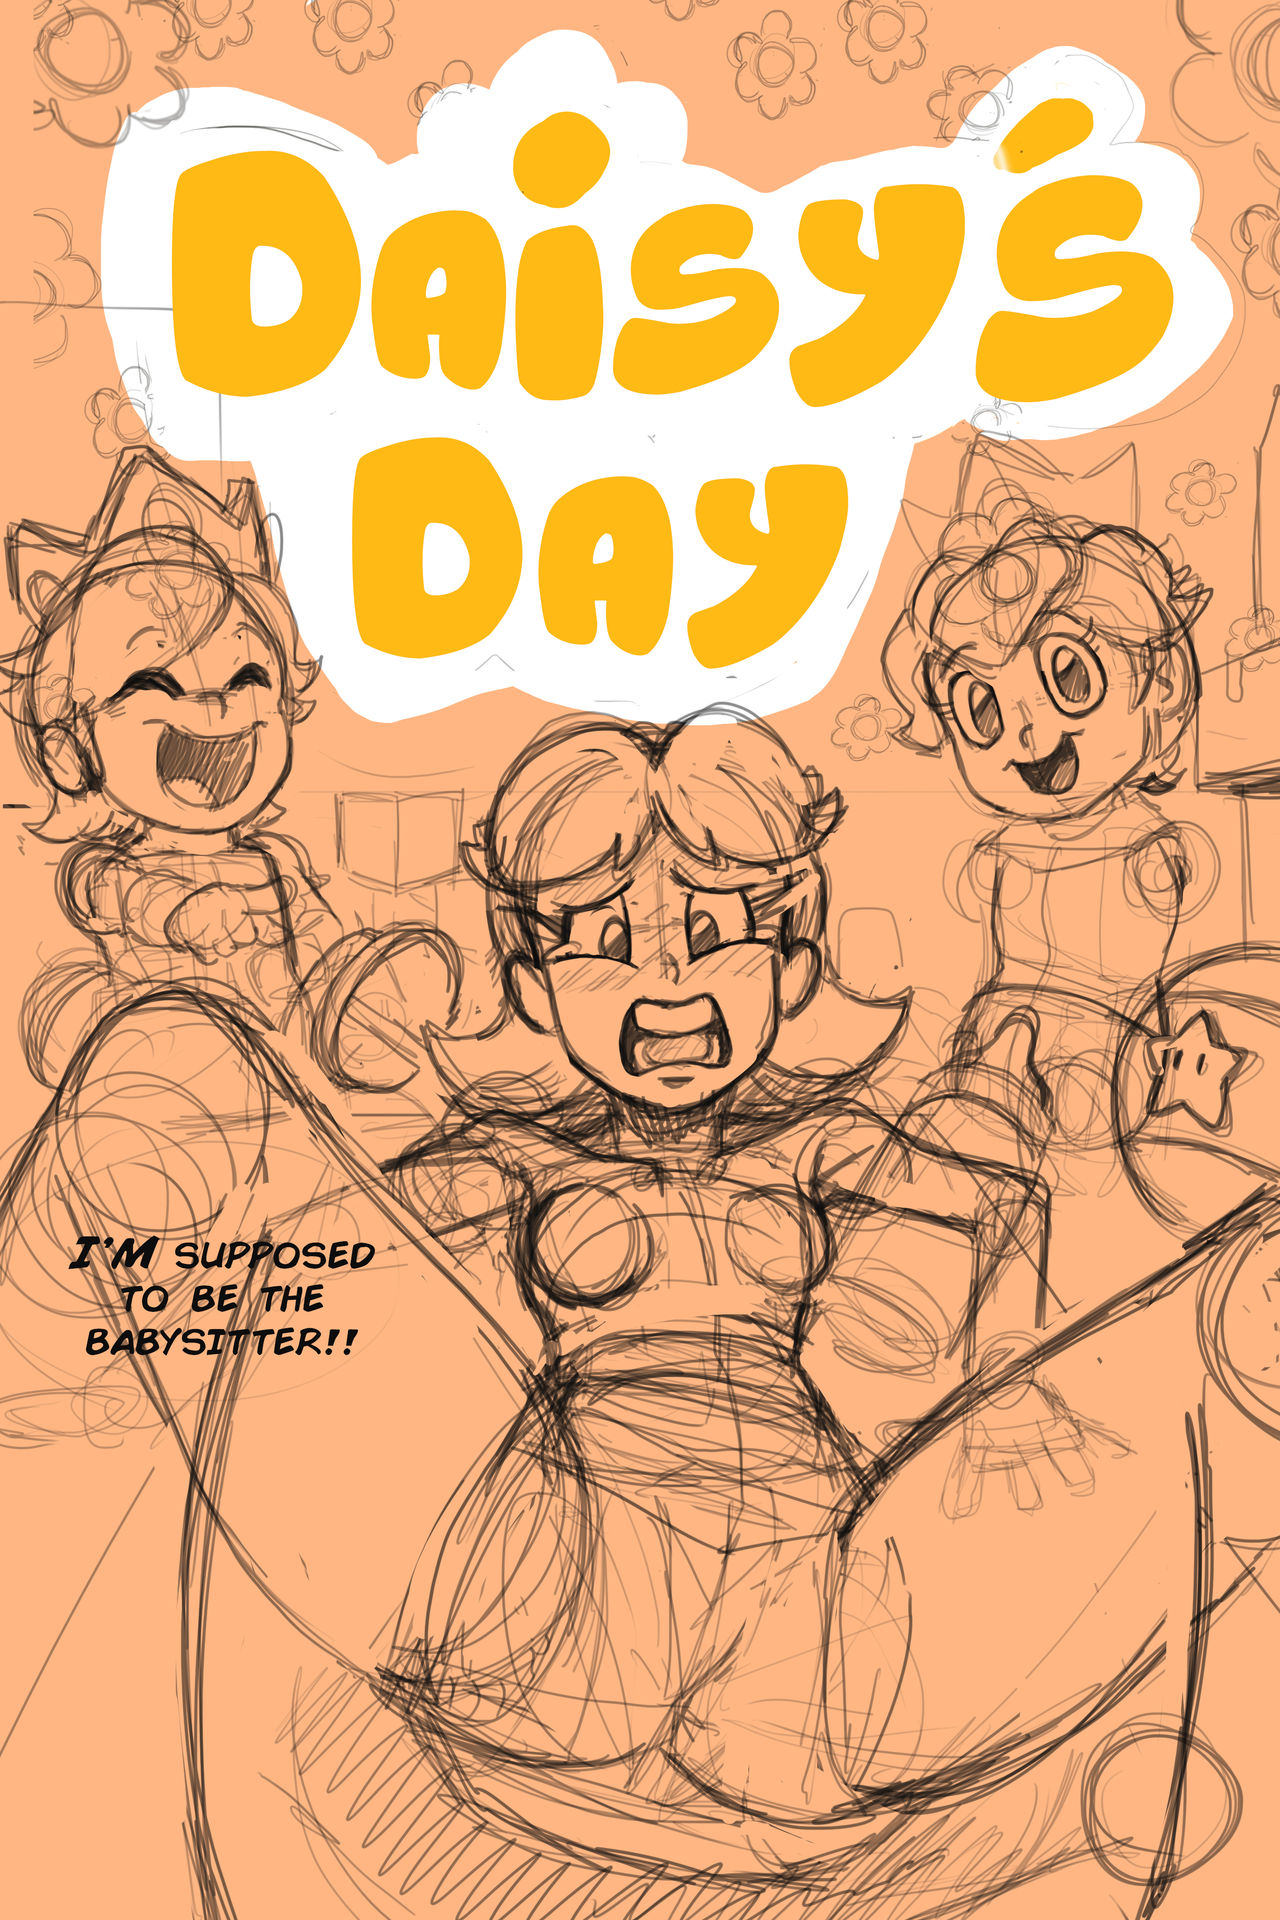 1654092 main patreon daisy s day cover by pizzabagel dco8dkq